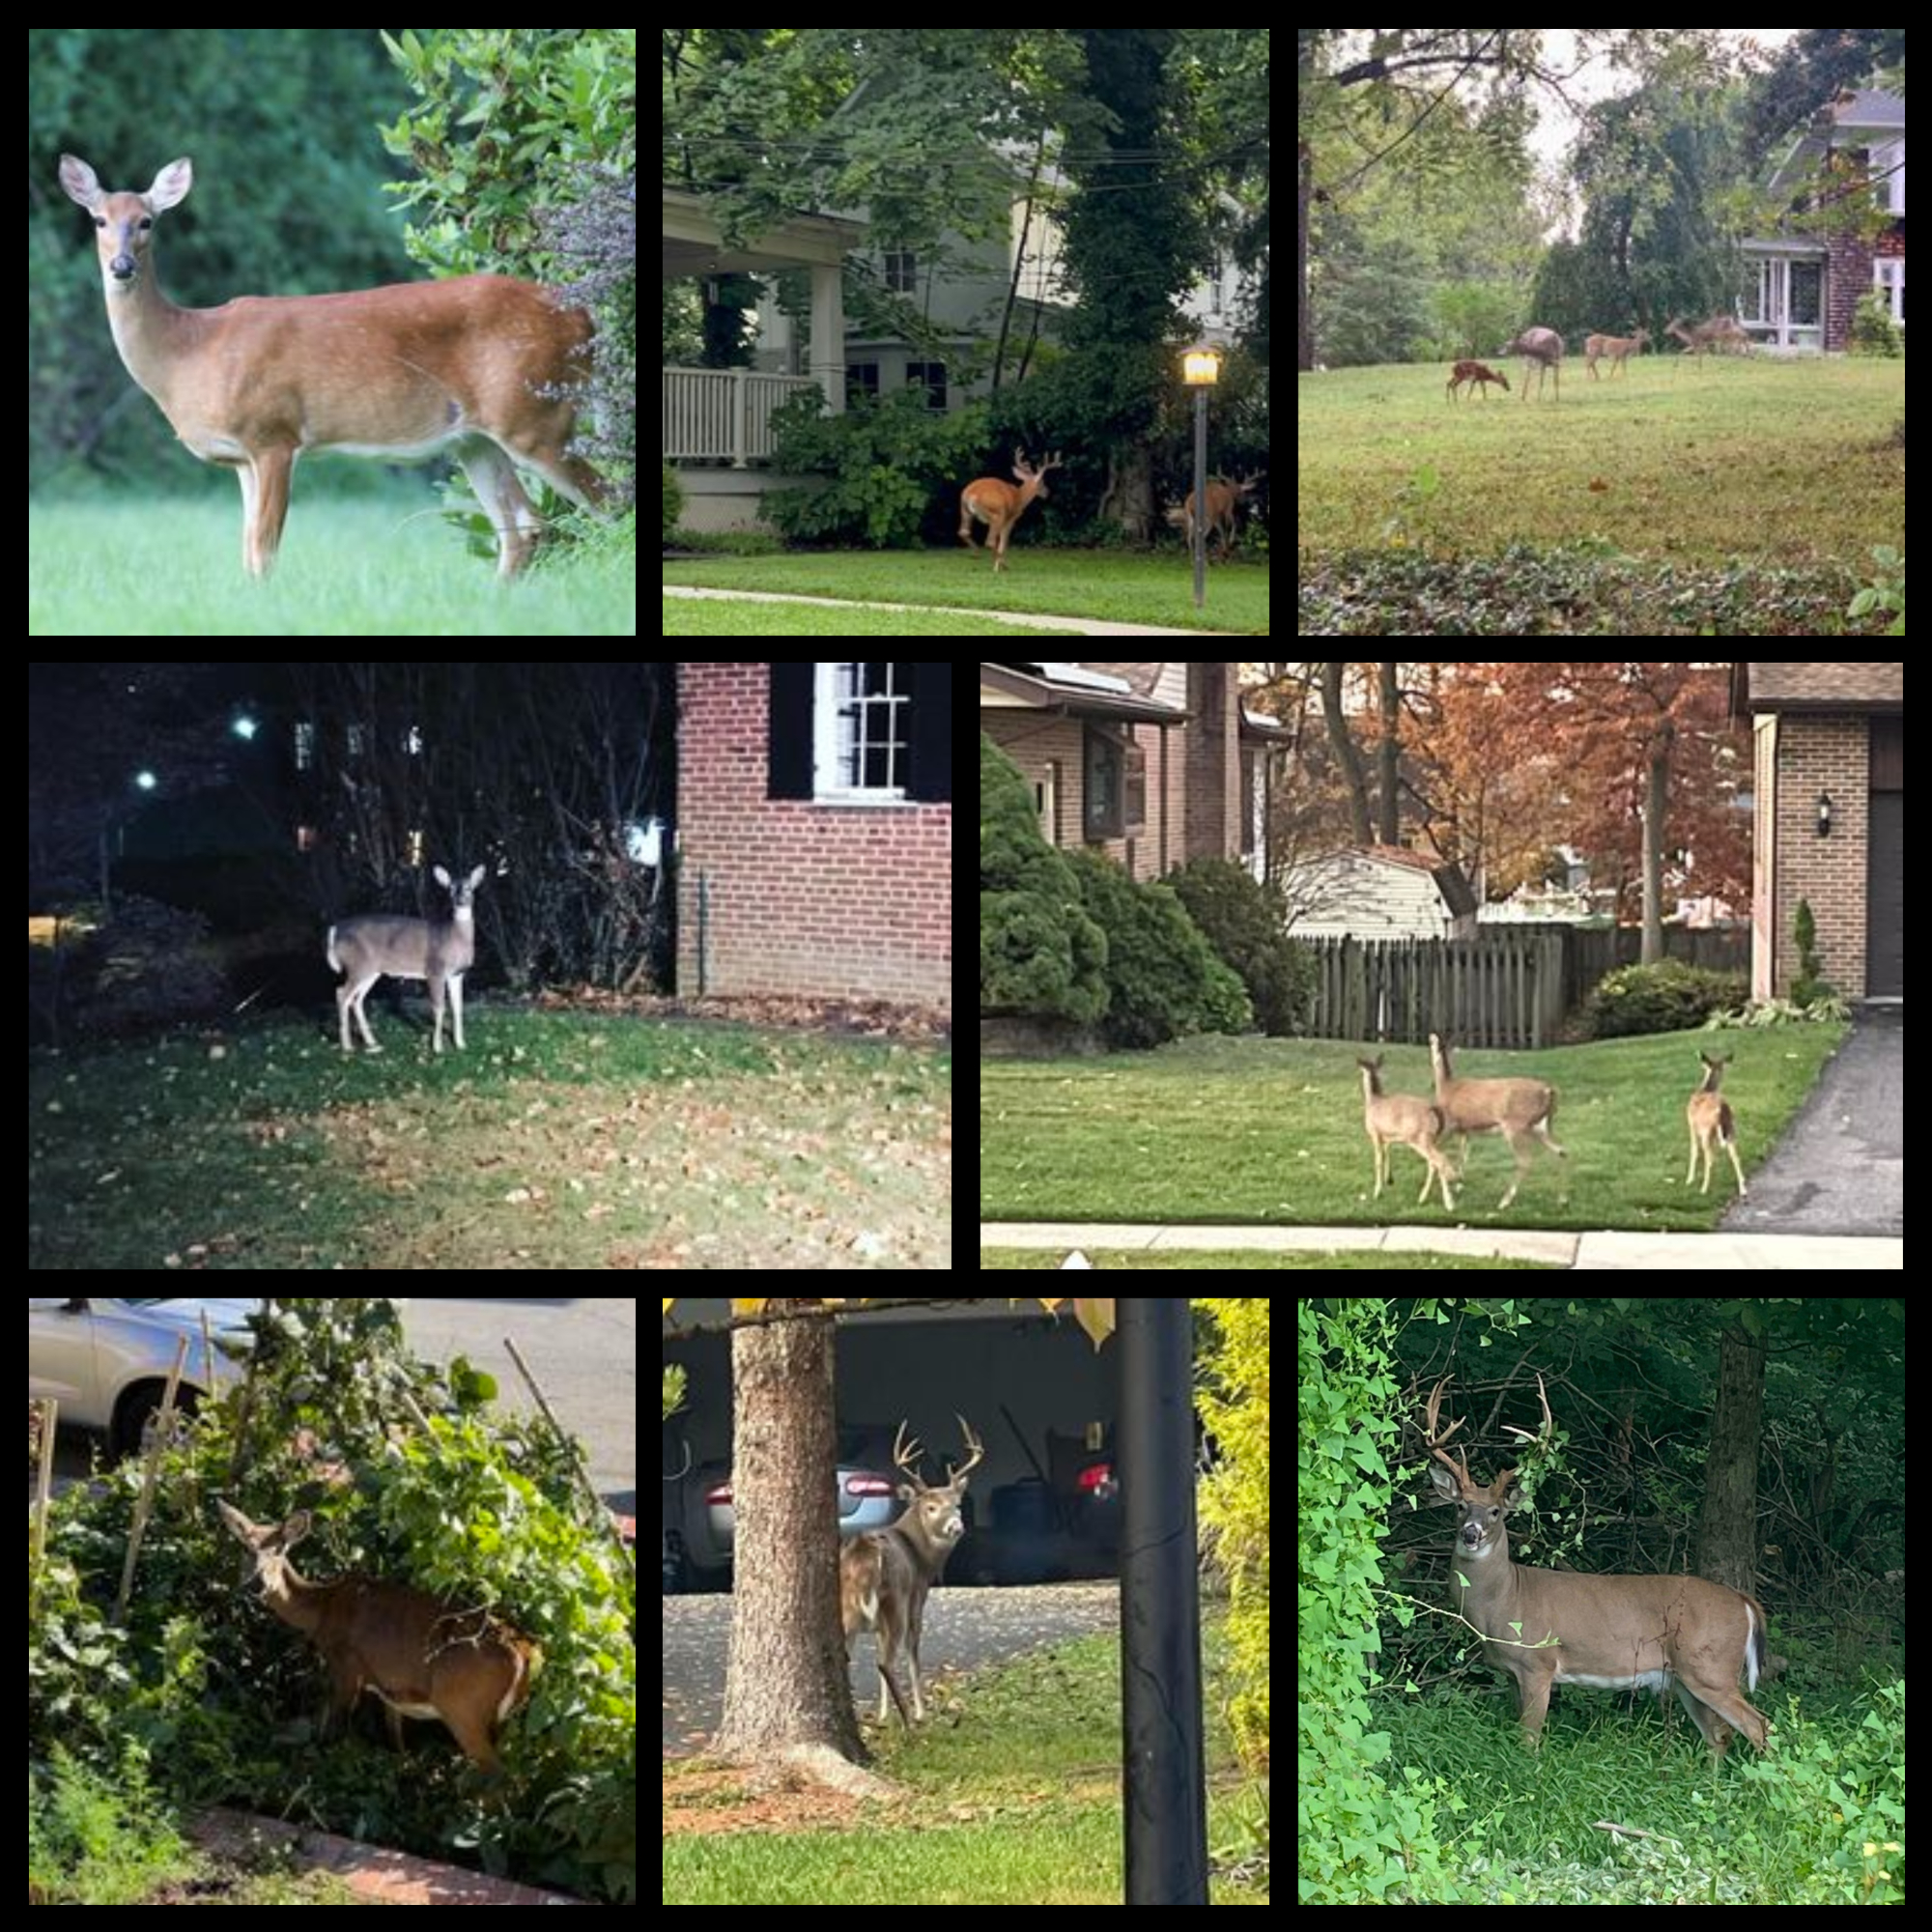 Why Are There So Many Deer Everywhere?